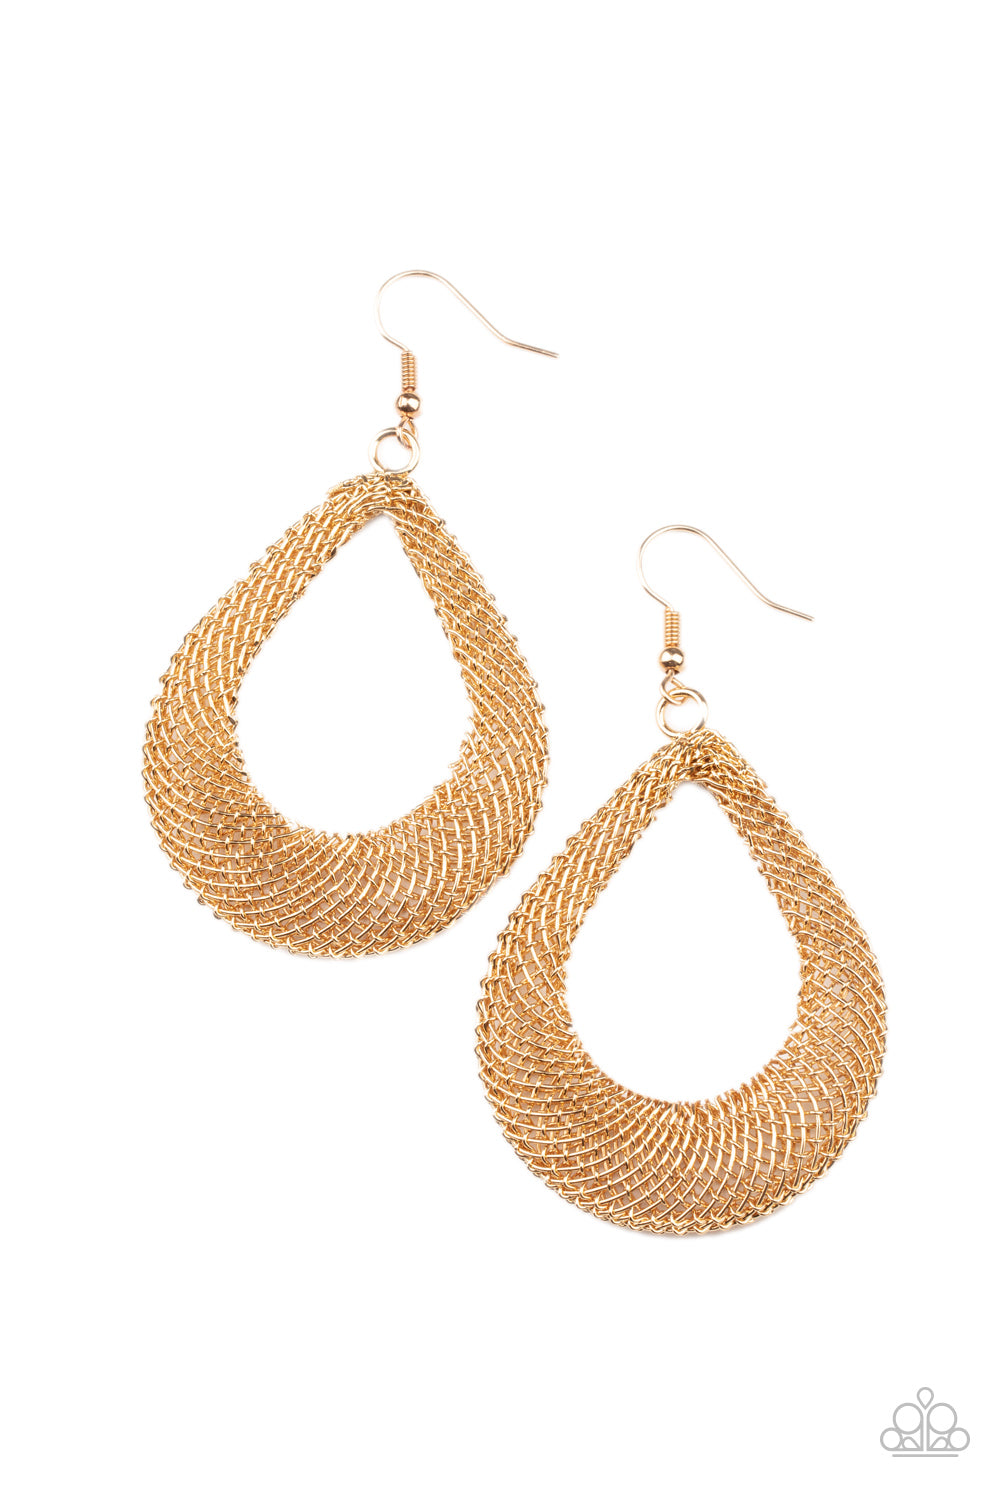 Mesh-like gold chain frames delicately attach into a 3-dimensional teardrop, creating an intense industrial display. Earring attaches to a standard fishhook fitting.